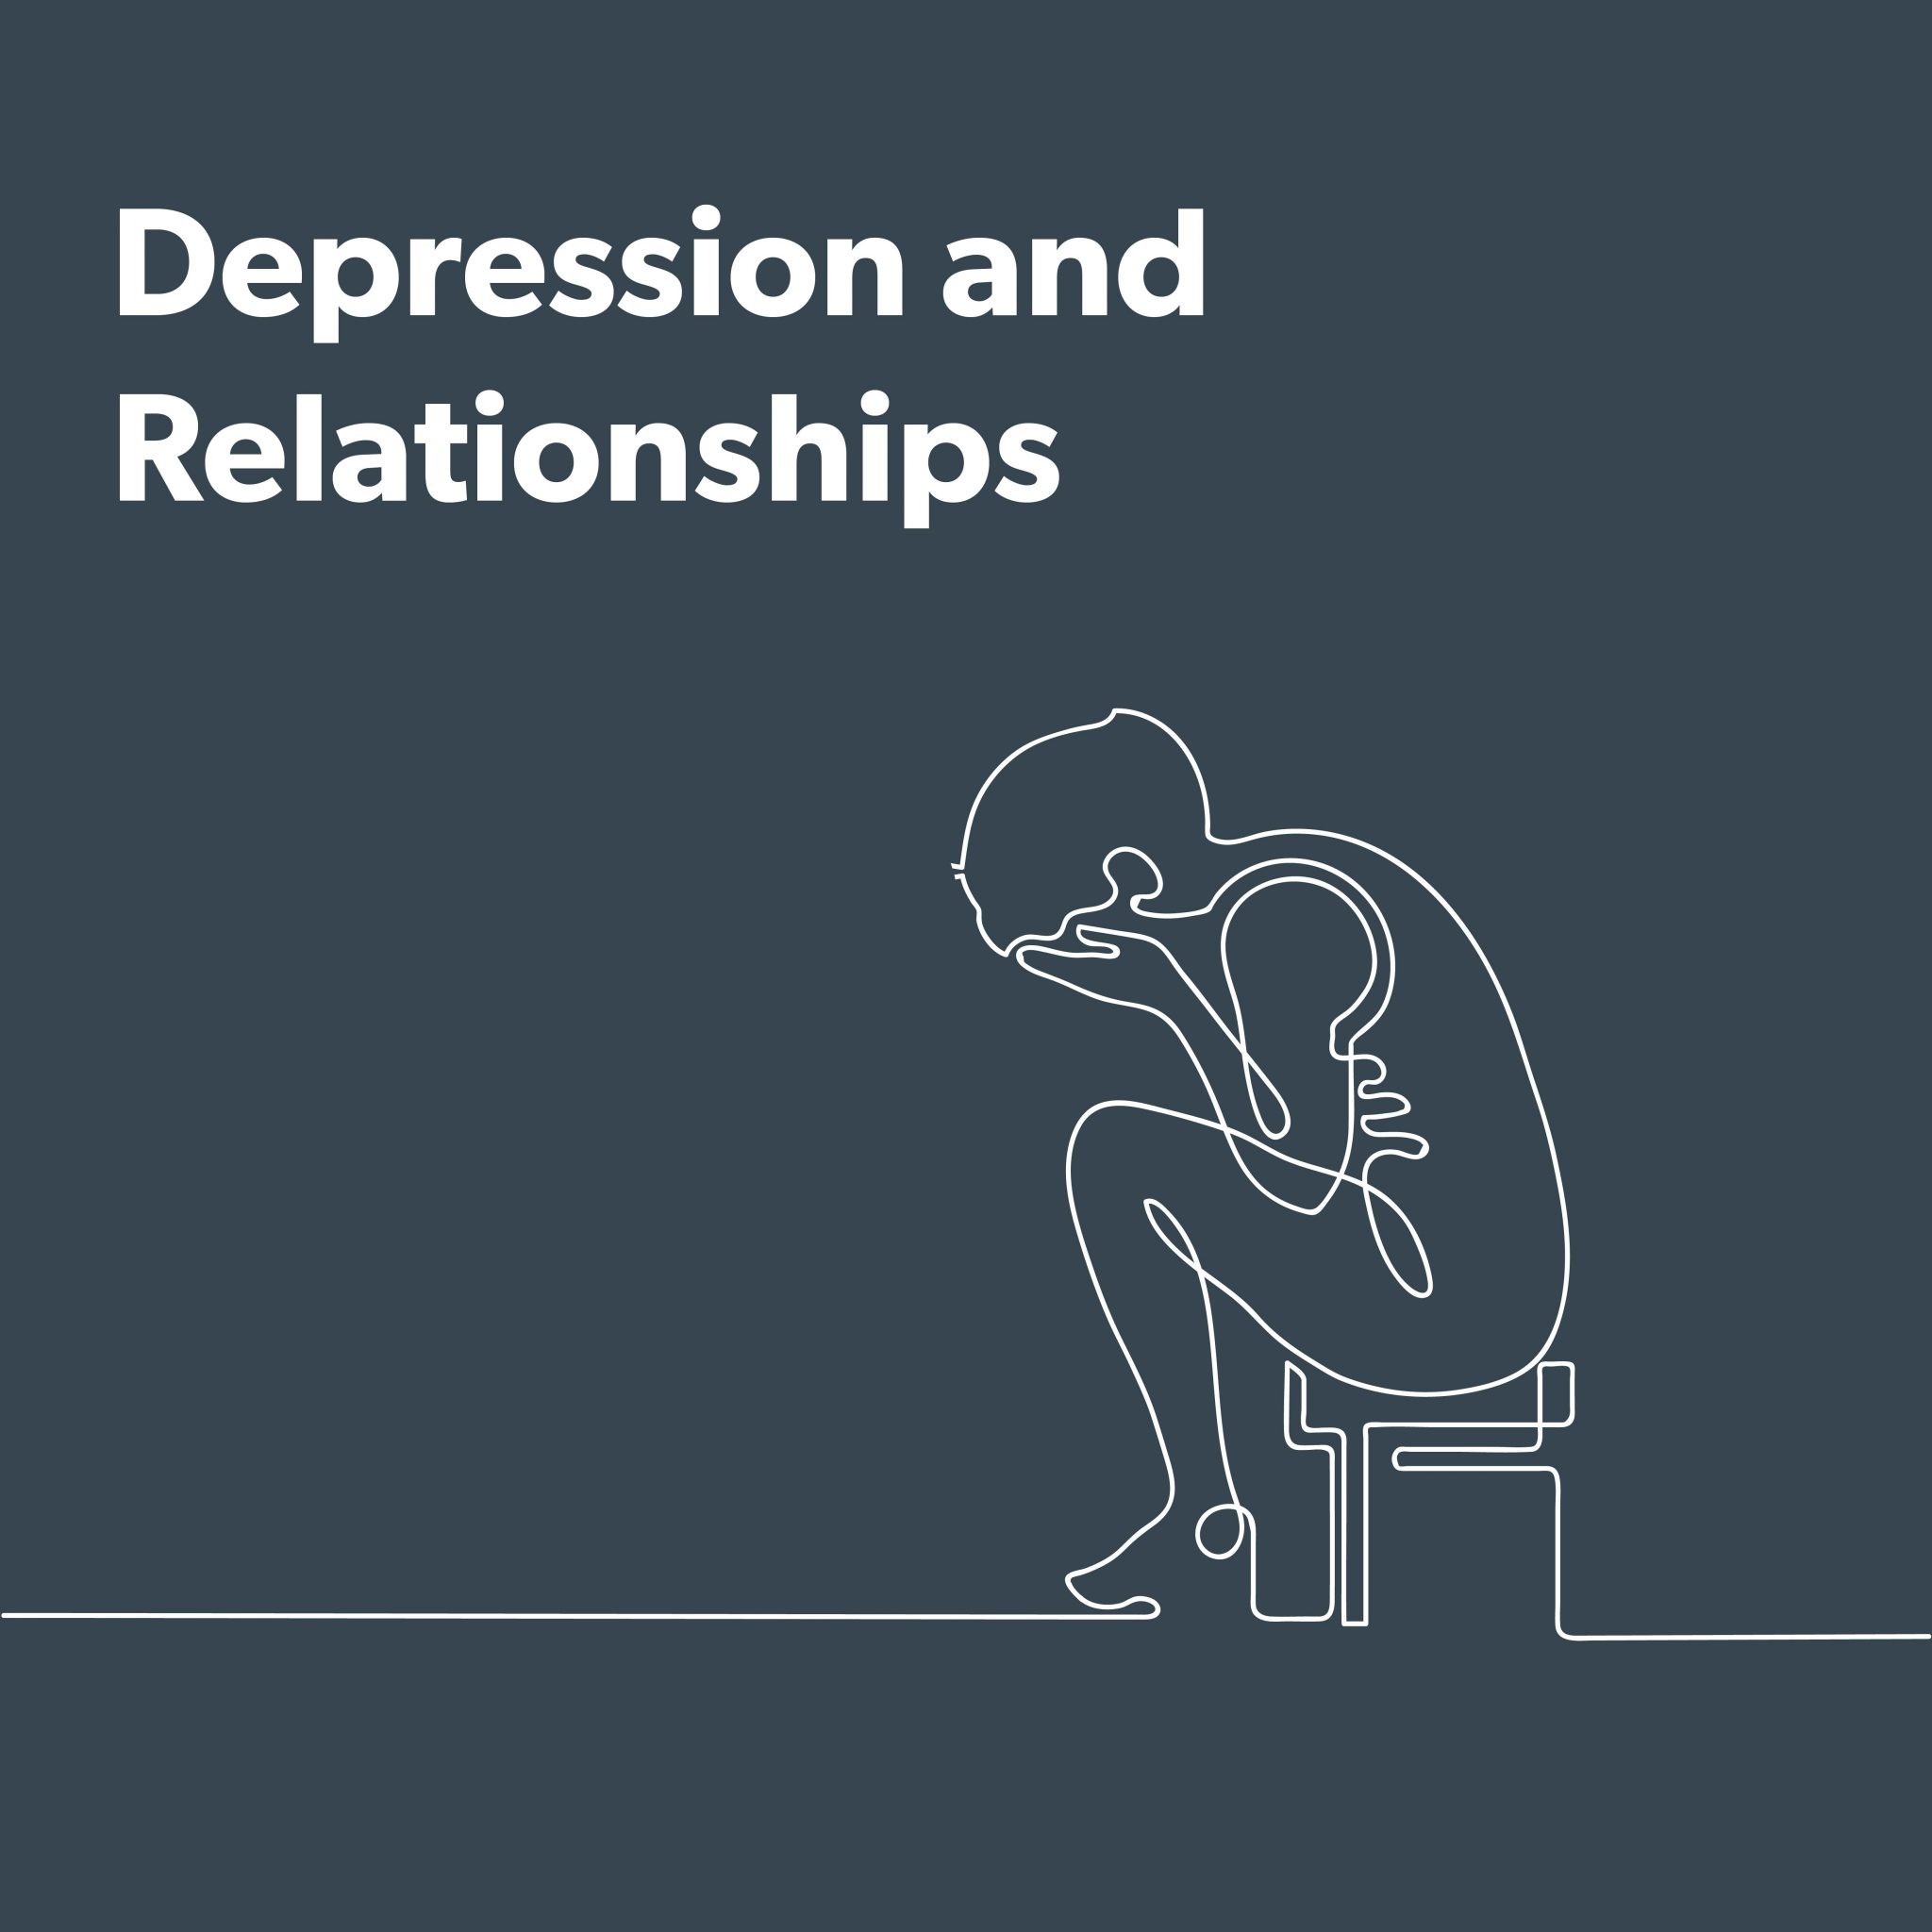 Depression and Relationships  How one can affect the other